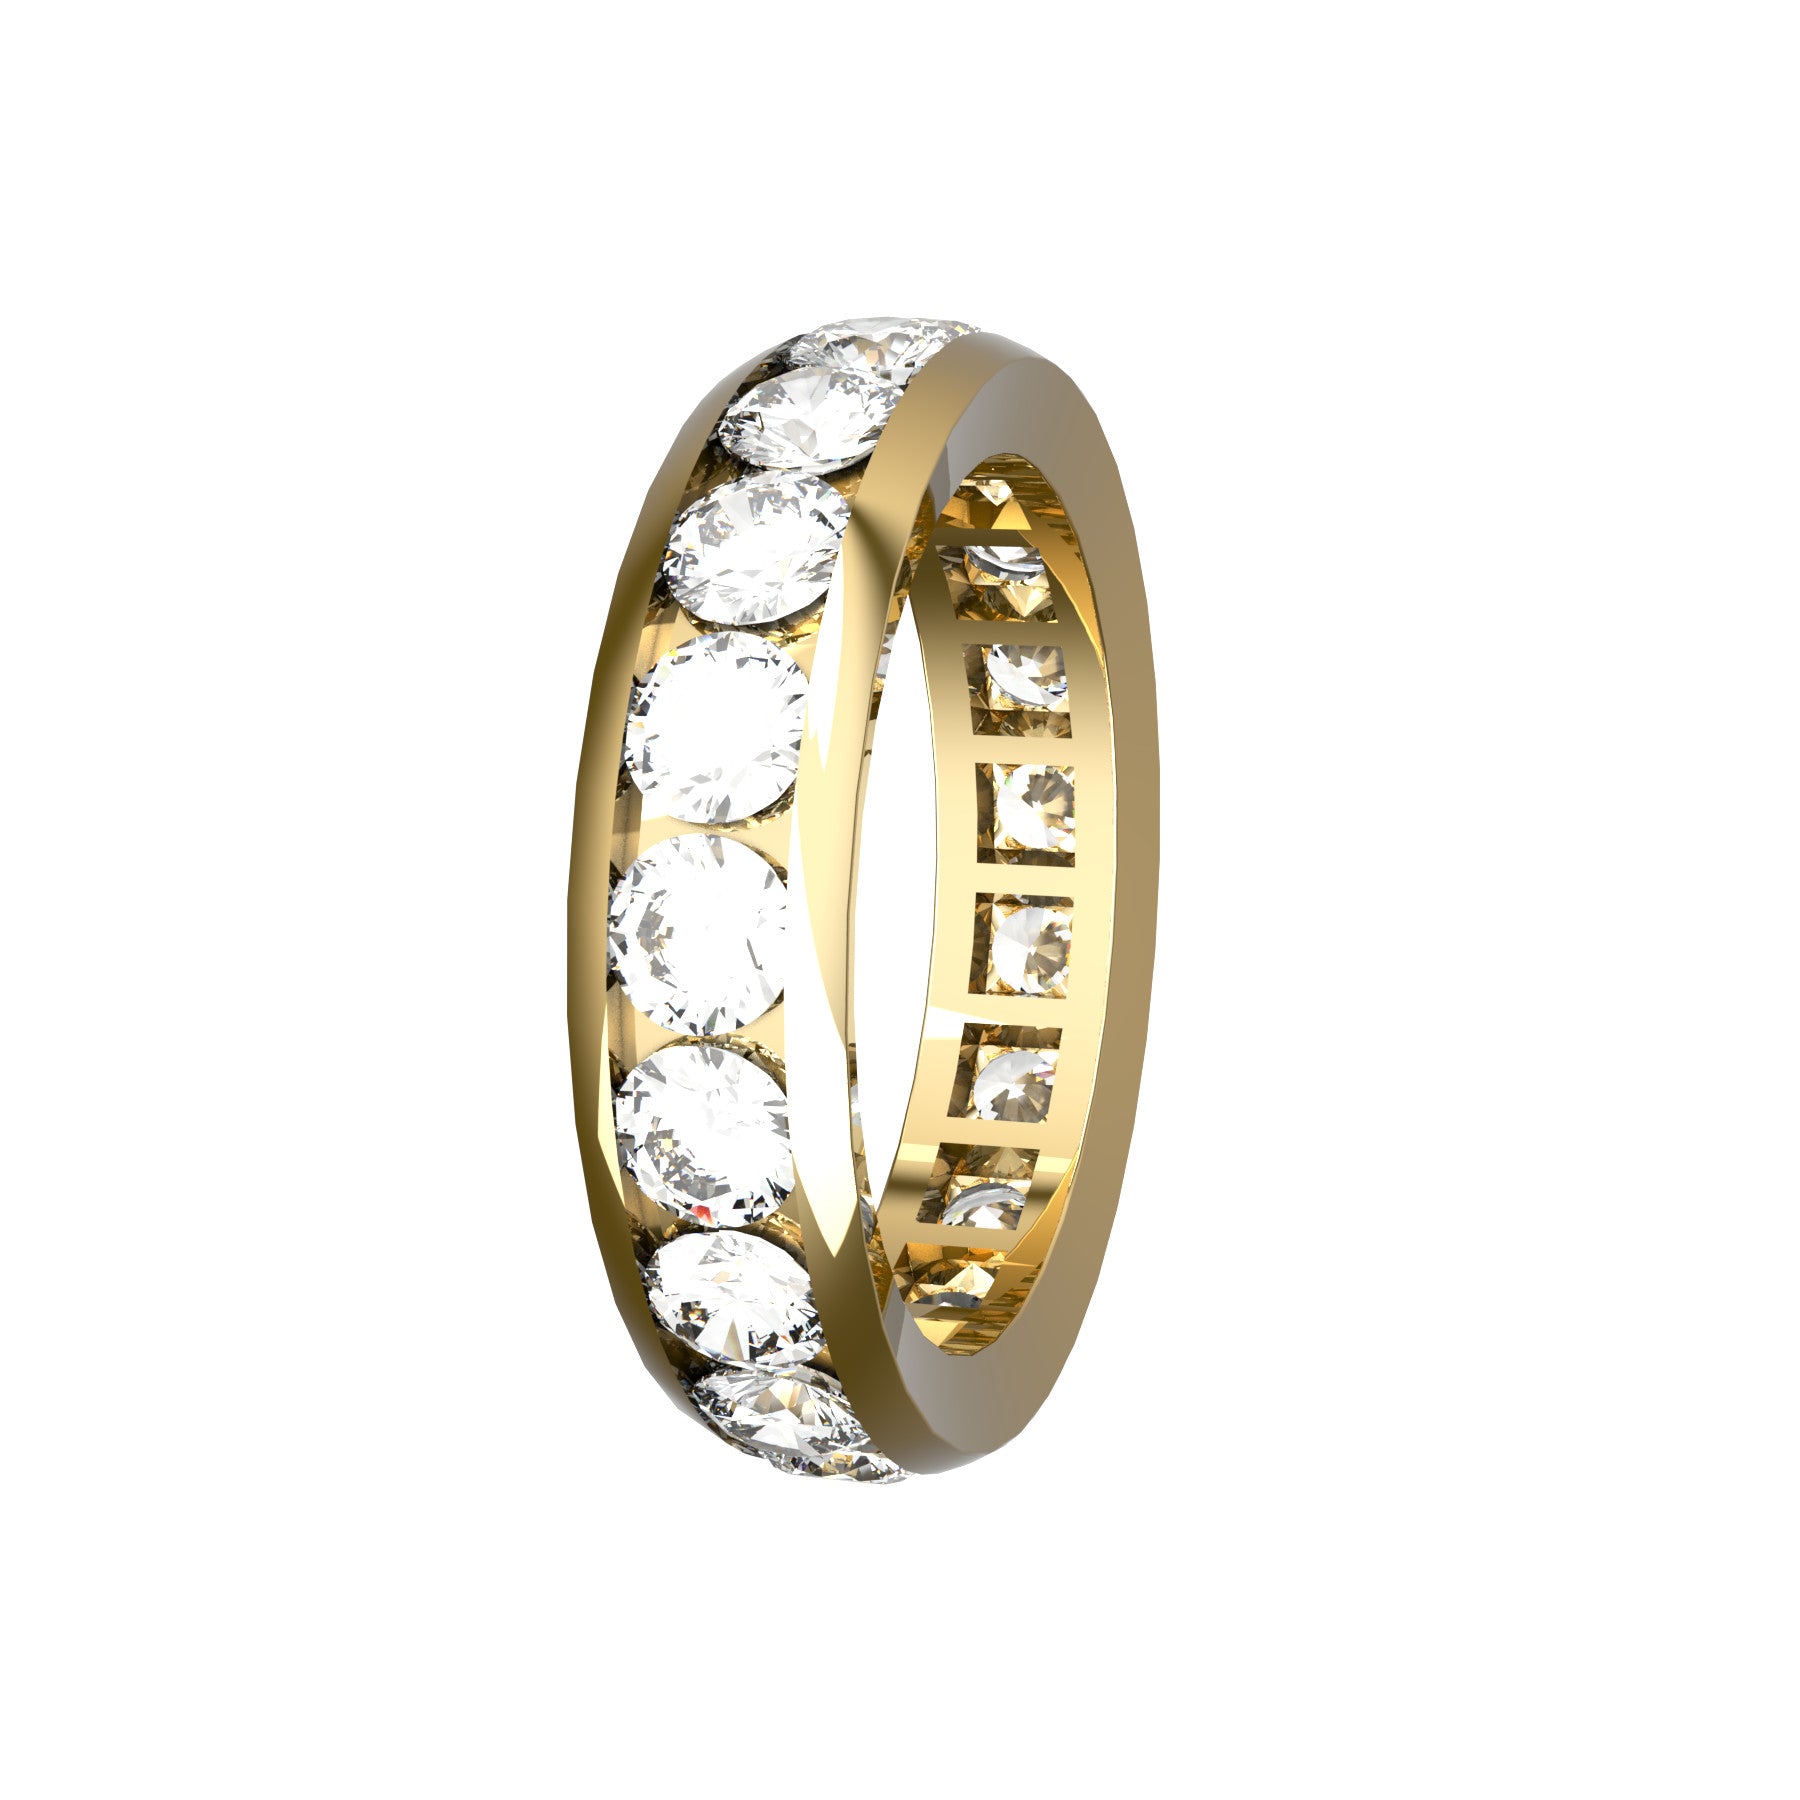  everlasting wedding band, 18 k yellow gold, 0,13 ct round natural diamonds, weight about 4,90 g. (0,17 oz), width 5,00 mm